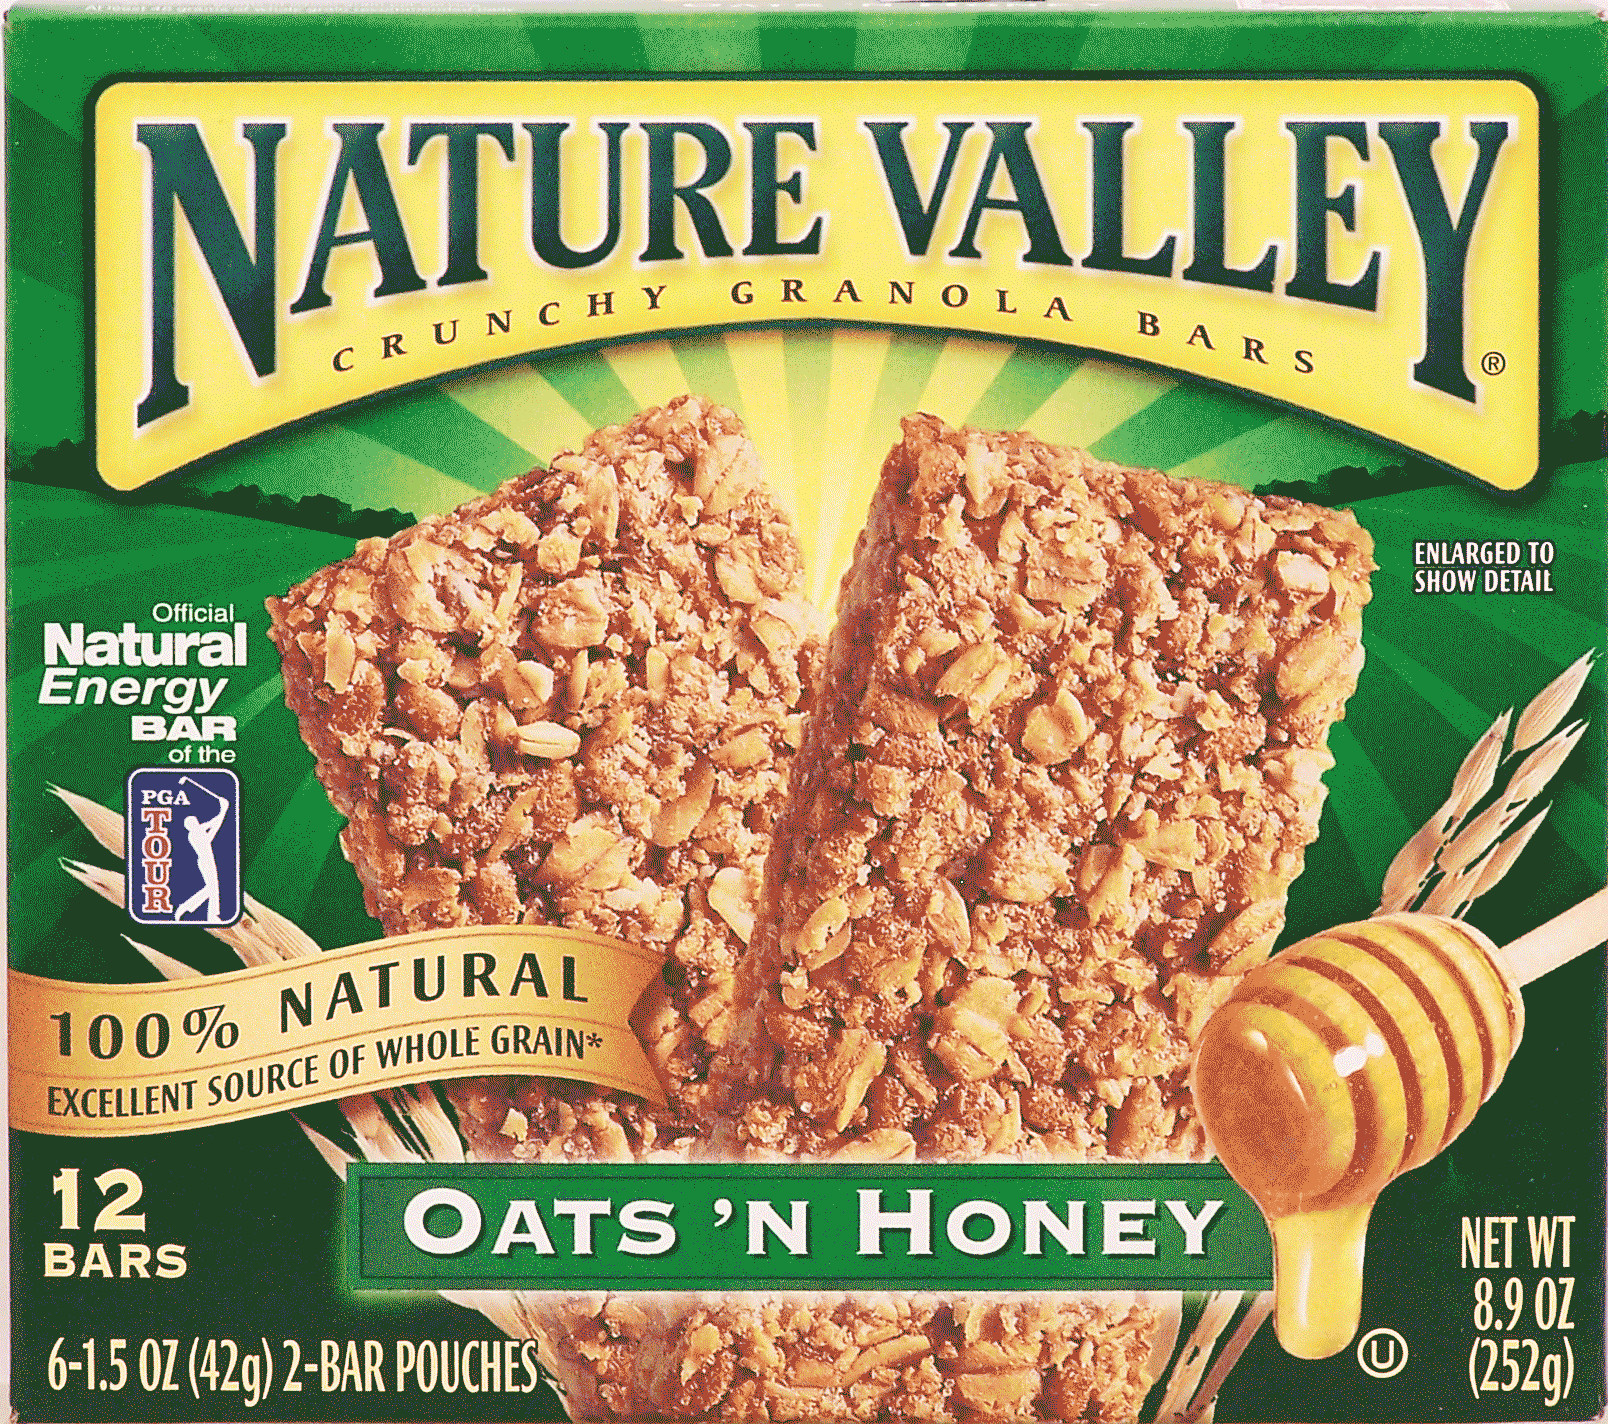 Nature Valley Oats and Honey Gluten Free Best Of Nature Valley Crunchy Granola Bars Oats N Honey Gluten Free